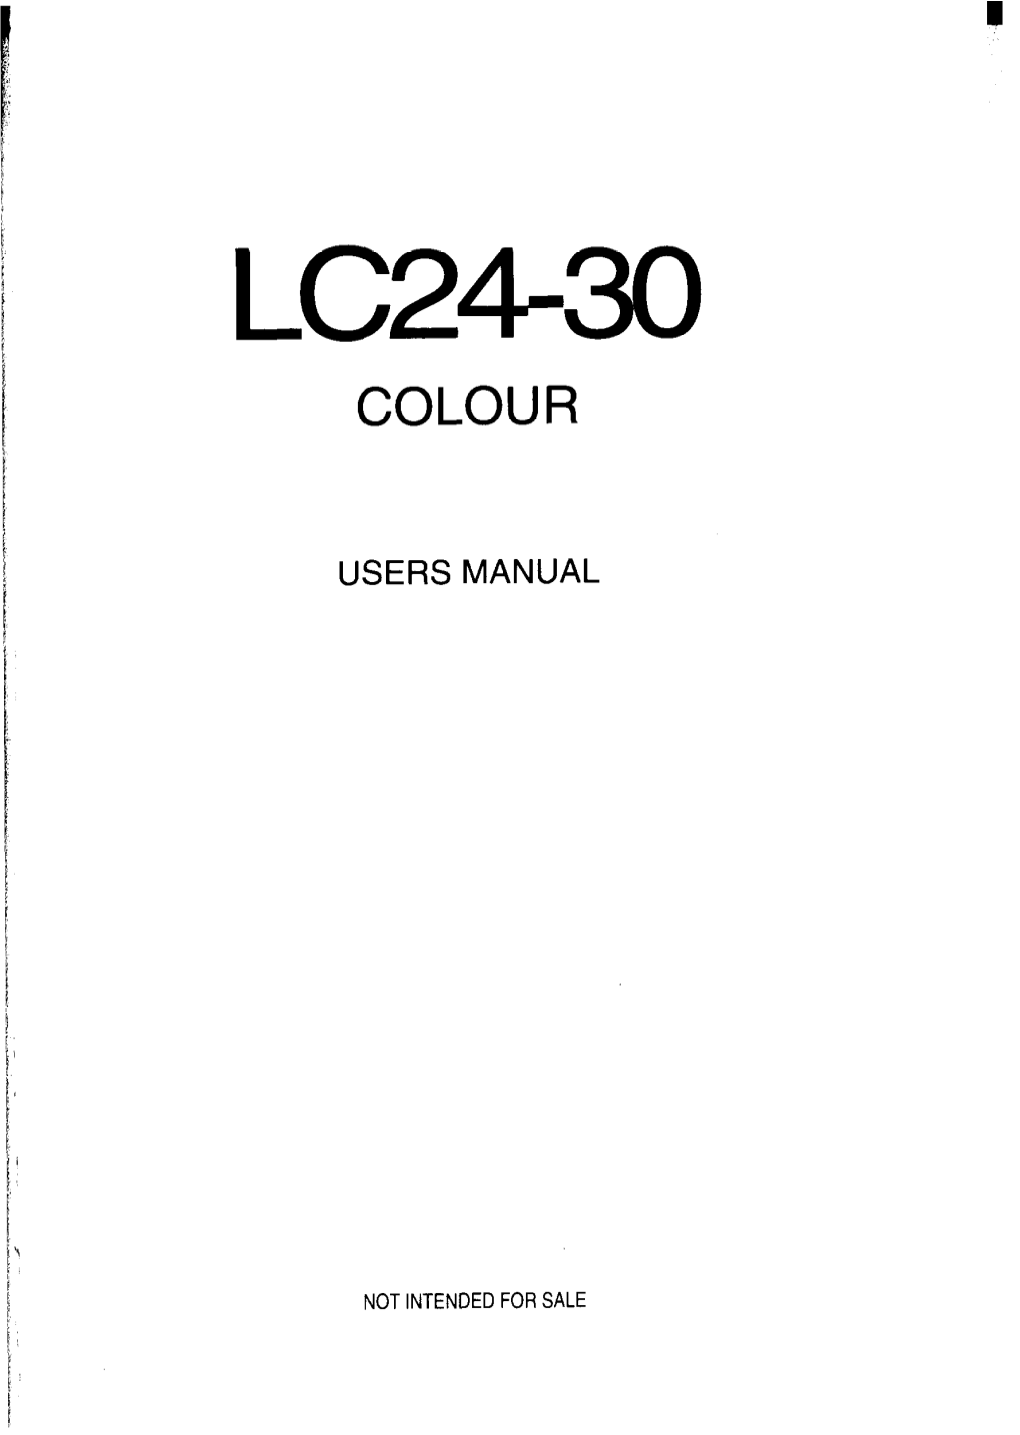 Lc24-30 Colour Users Manual